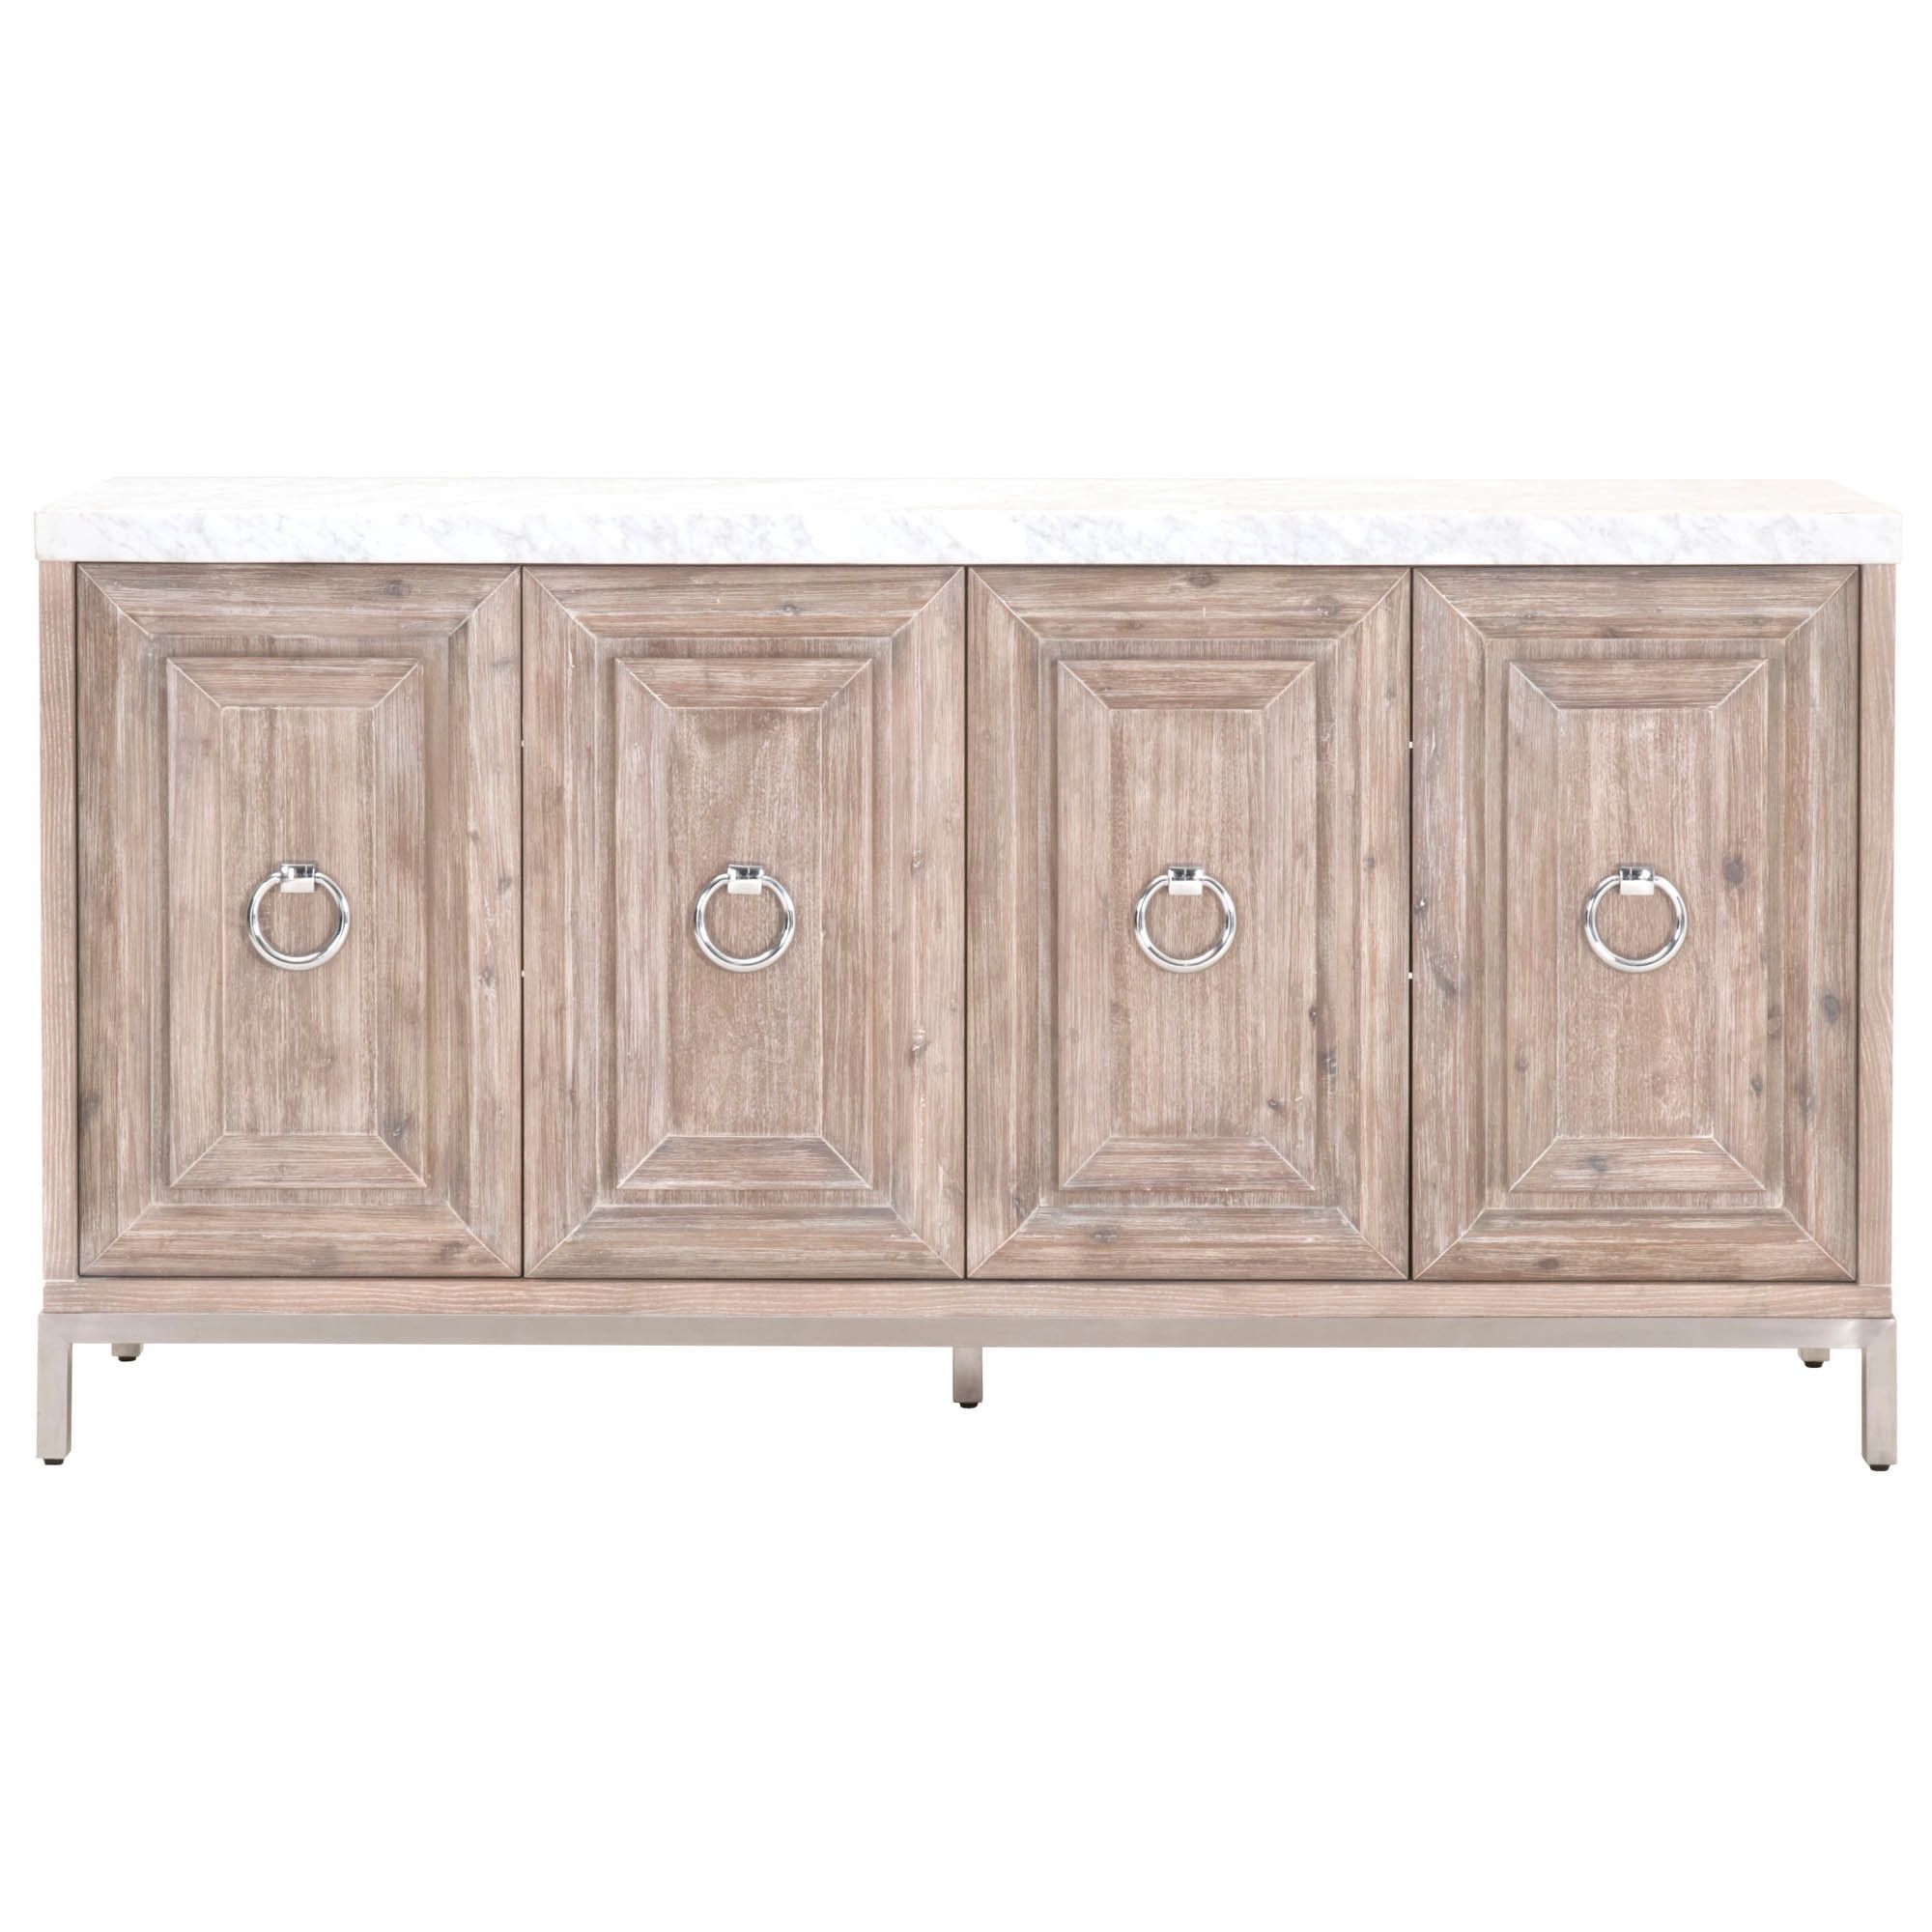 Brown Sideboard / Credenza Sideboards & Buffets You'll Love Intended For Chaffins Sideboards (View 17 of 20)